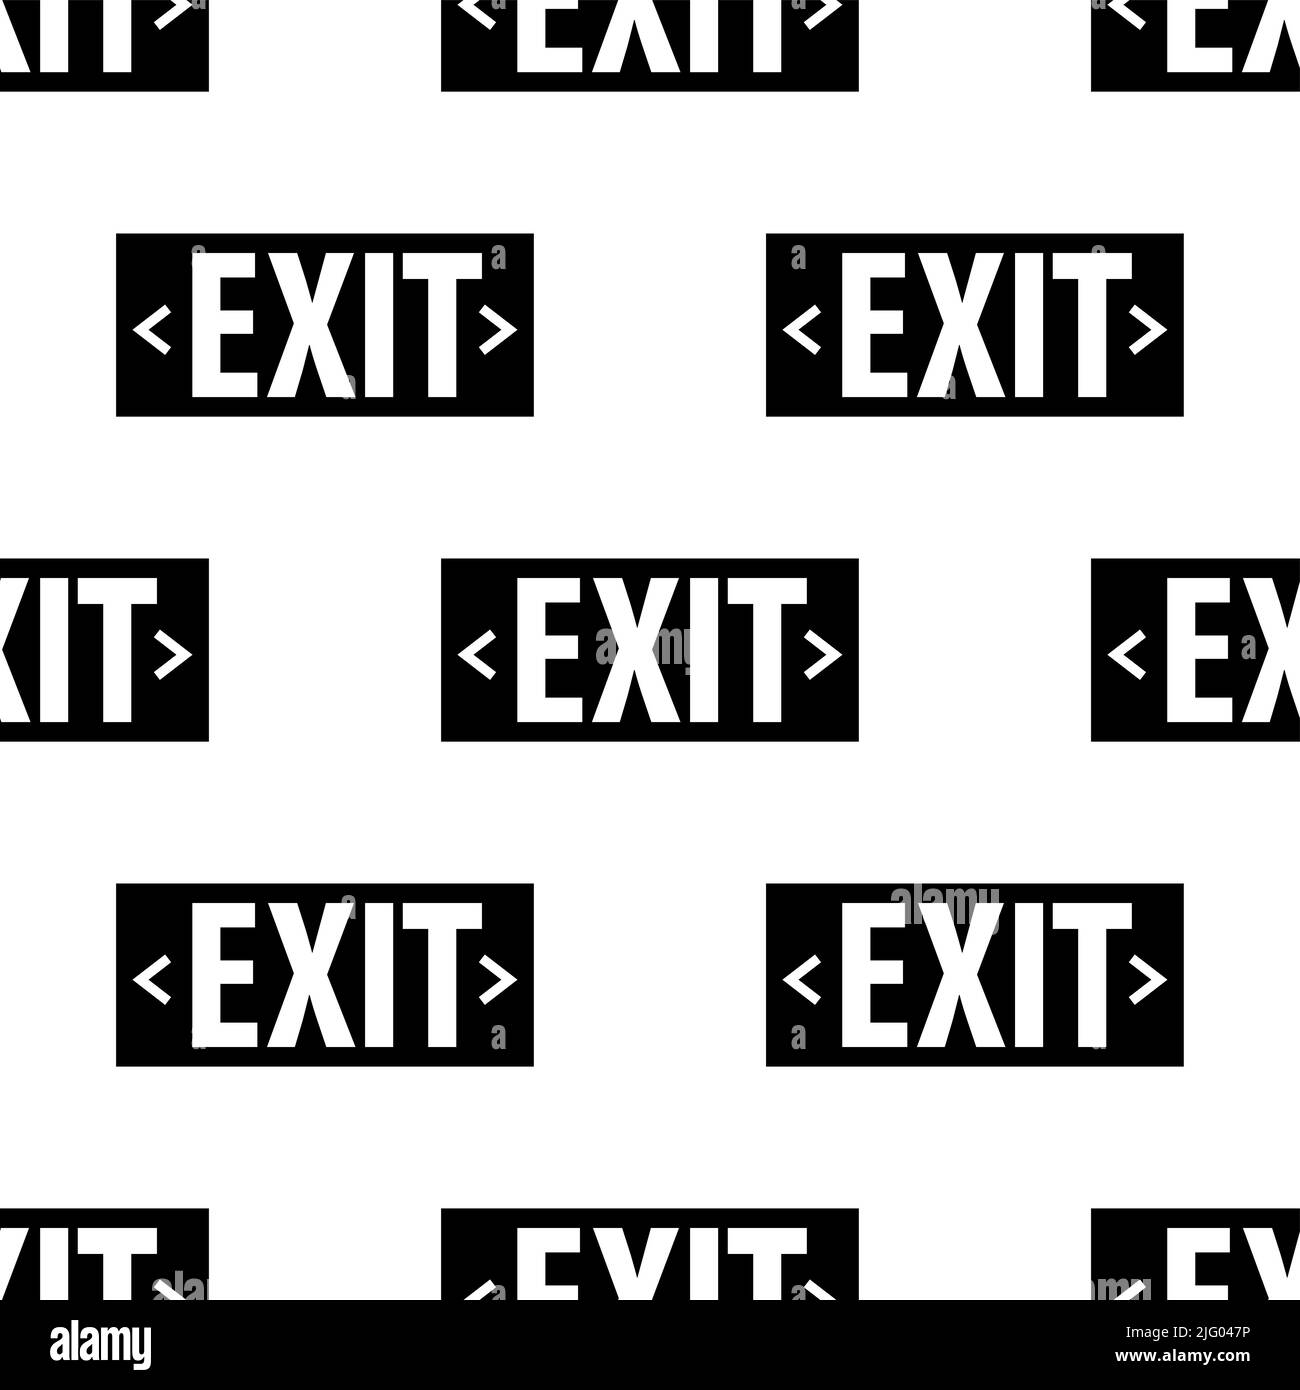 Exit Icon Seamless Pattern, Exit Sign Icon, Normal , Emergency, Special, Fire, Faster Evacuation Exit Vector Art Illustration Stock Vector